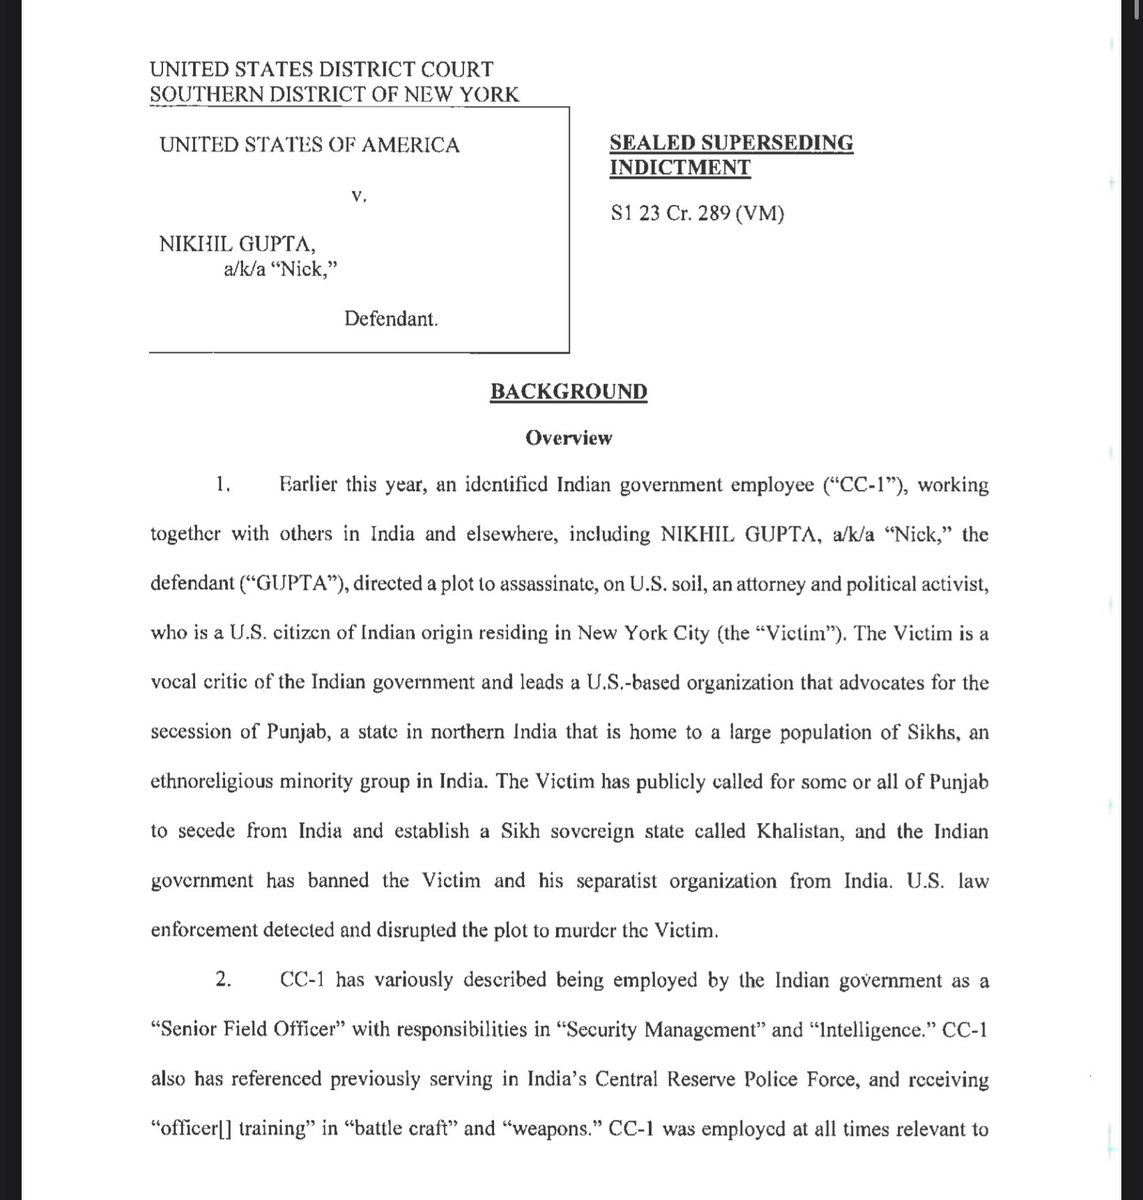 This could help make at least an episode of Homeland! US prosecutors said Nikhil Gupta, 52, worked with the Indian govt employee to assassinate a US resident who advocated for a Sikh sovereign state in India. Court filing here - justice.gov/d9/2023-11/u.s…